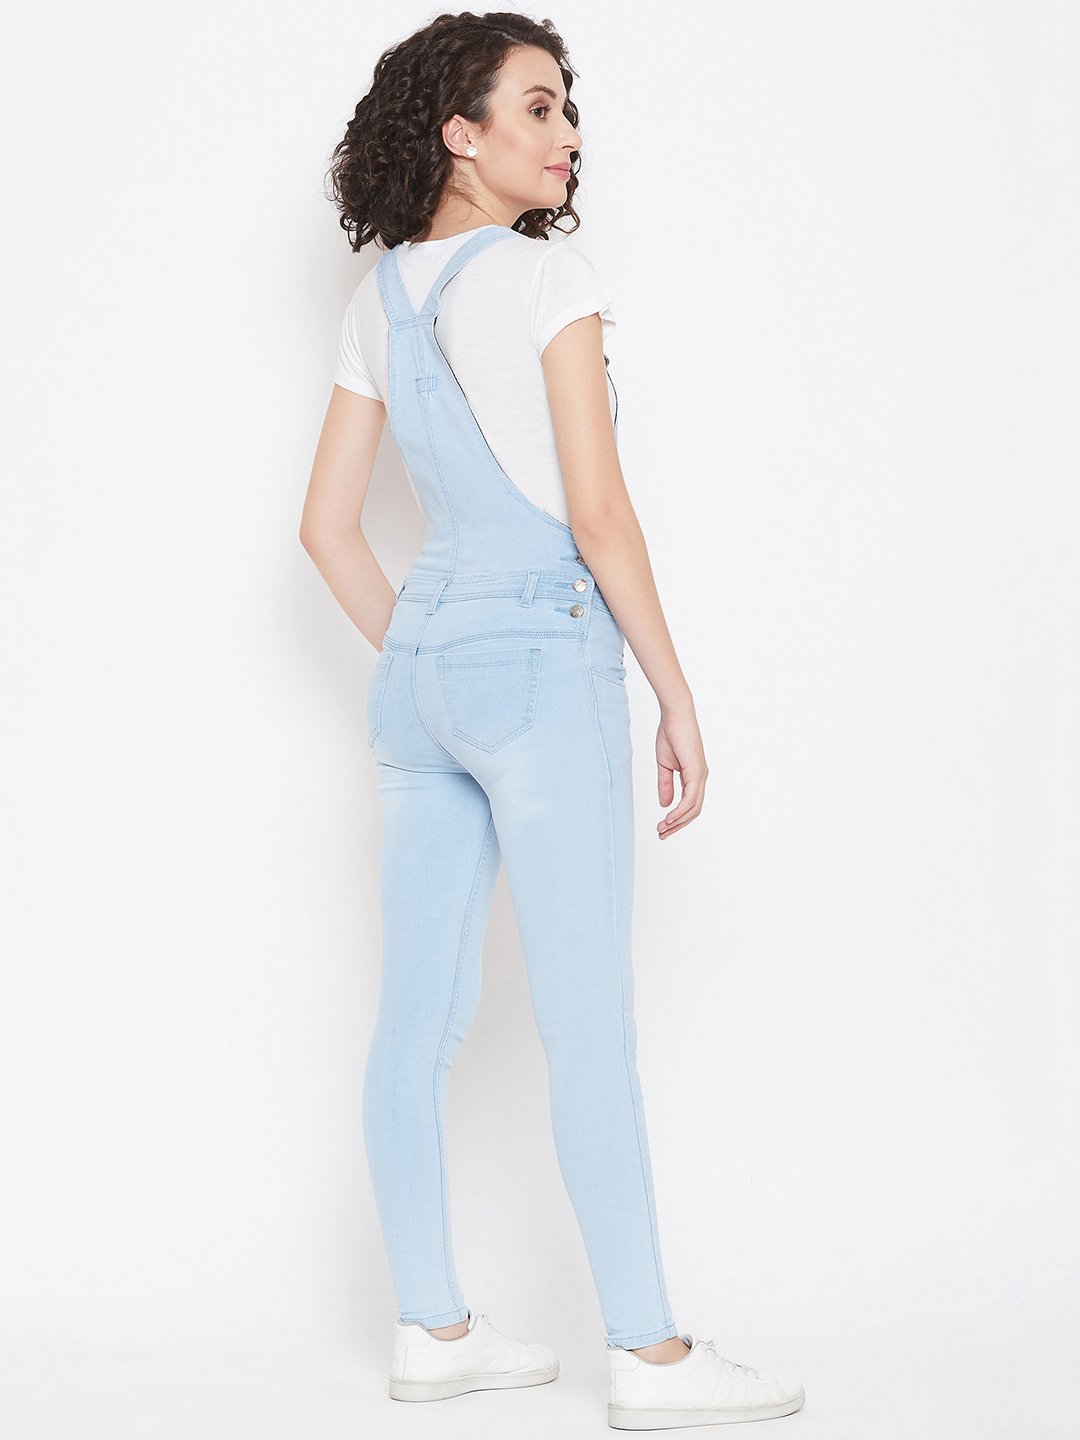 Slim Fit Stretchable Sky Blue Dungarees - NiftyJeans